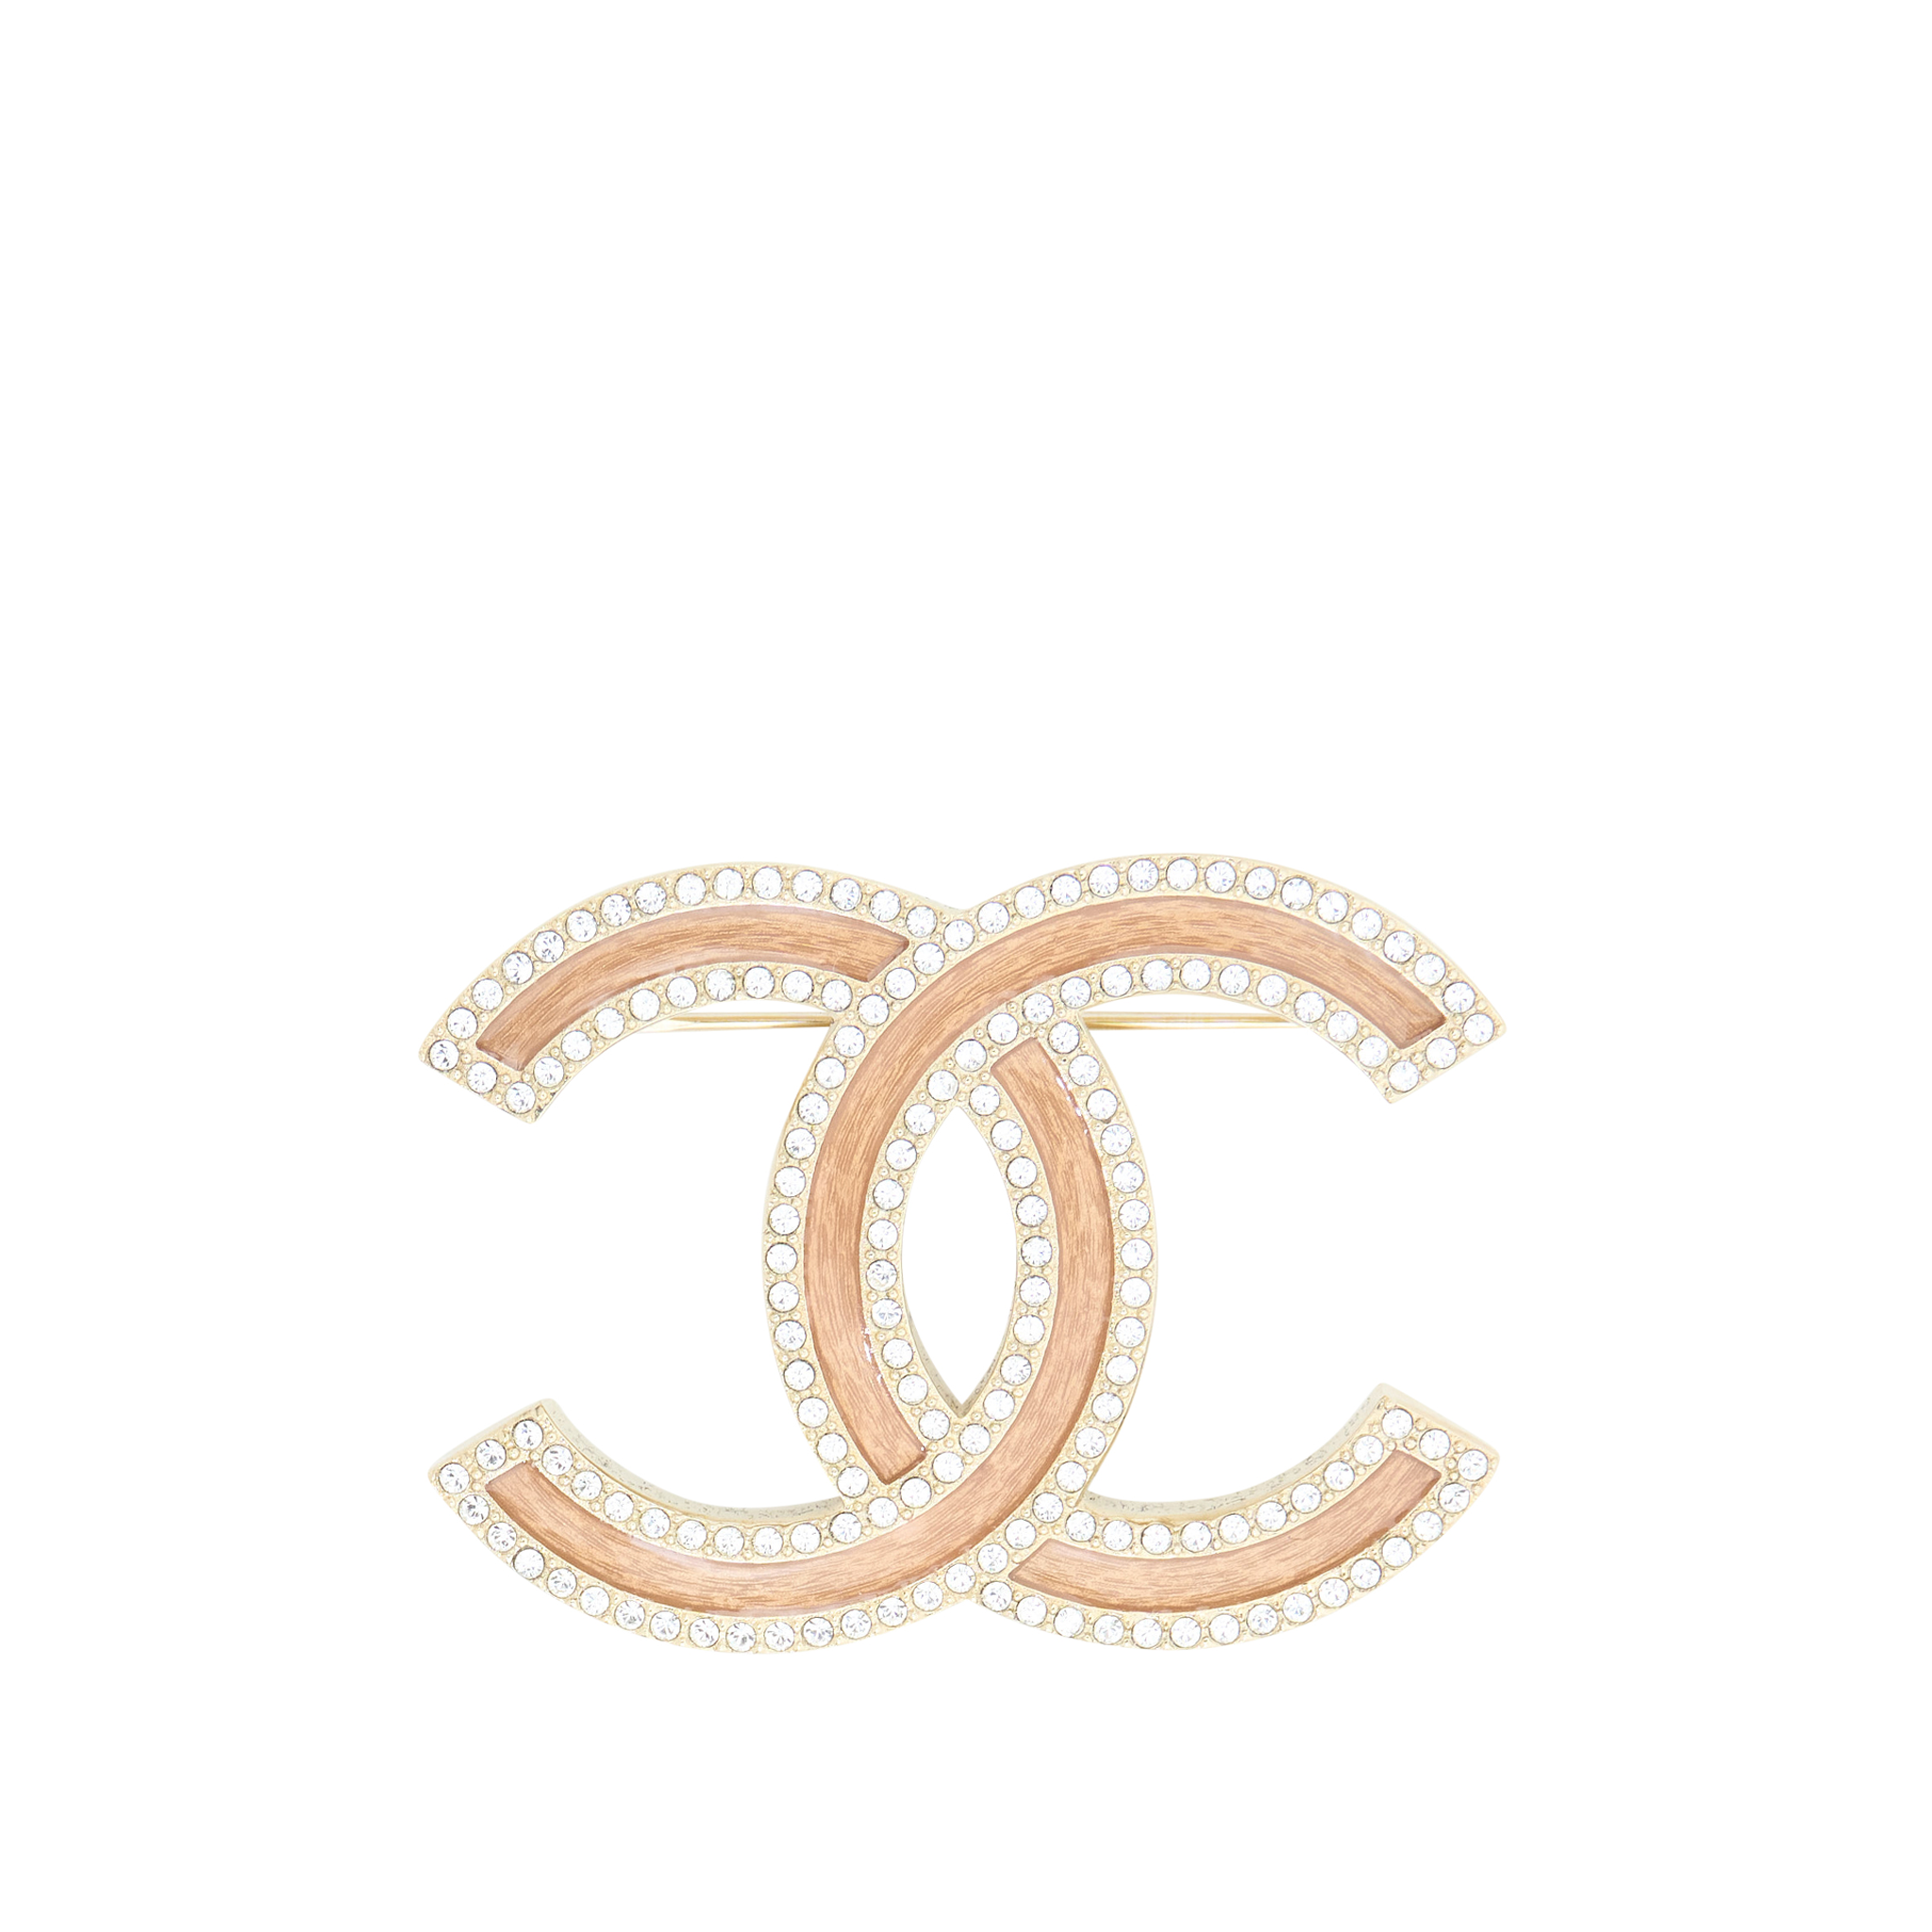 Chanel Crystal & Copperstone CC Brooch